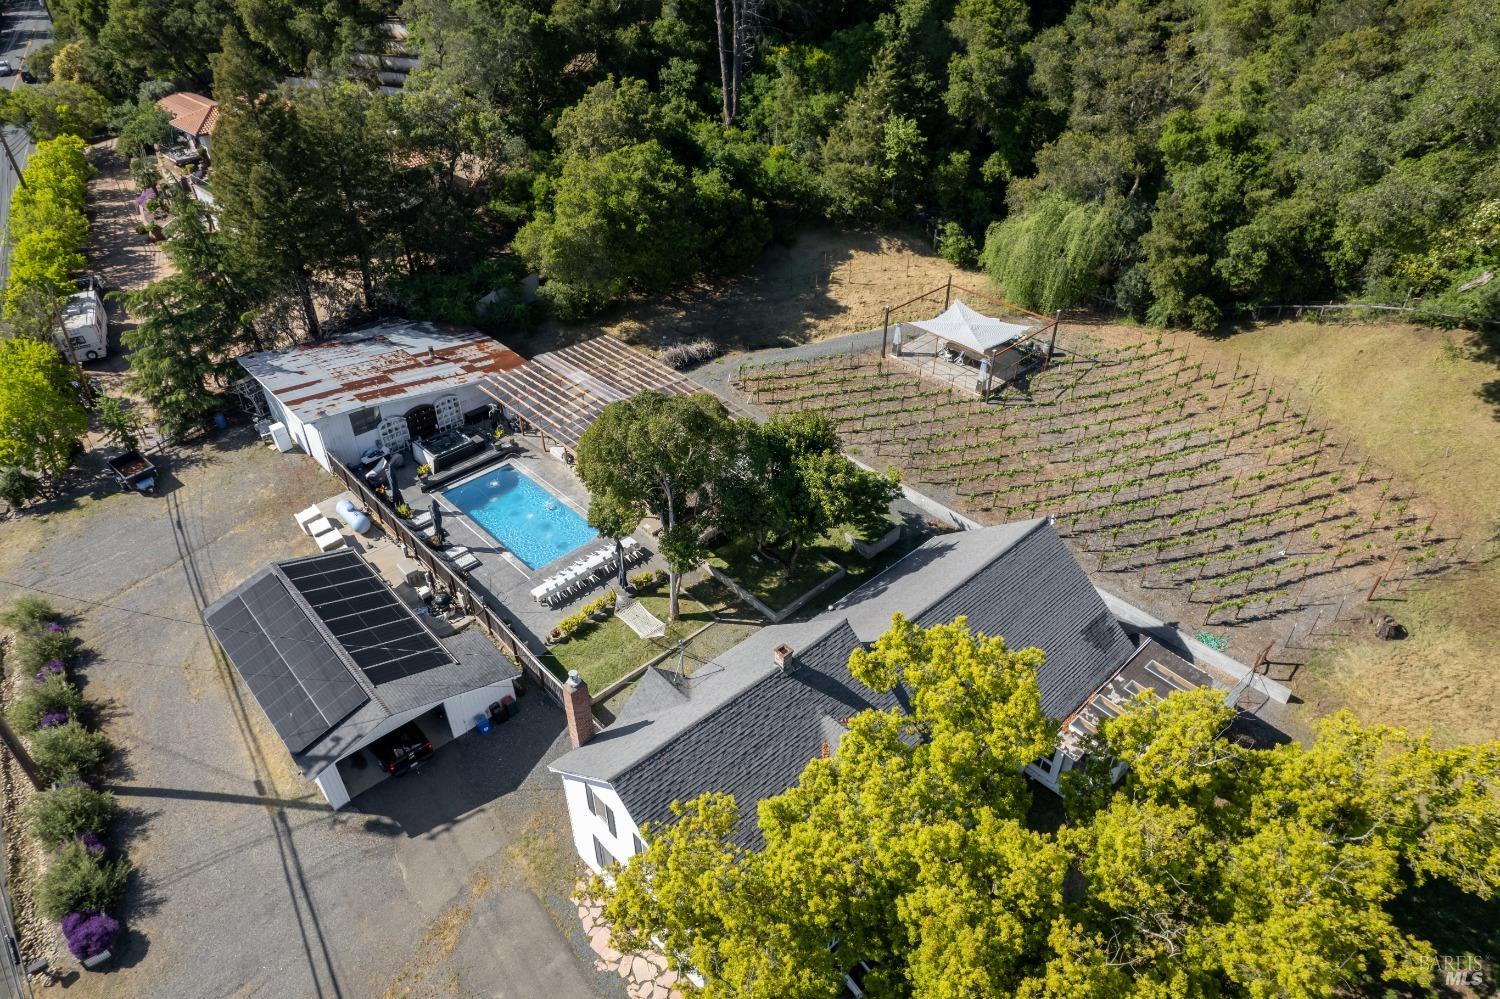 Drone shot looking west. A virtual playground with beautiful pool and picnic areas. Even in the vineyard.